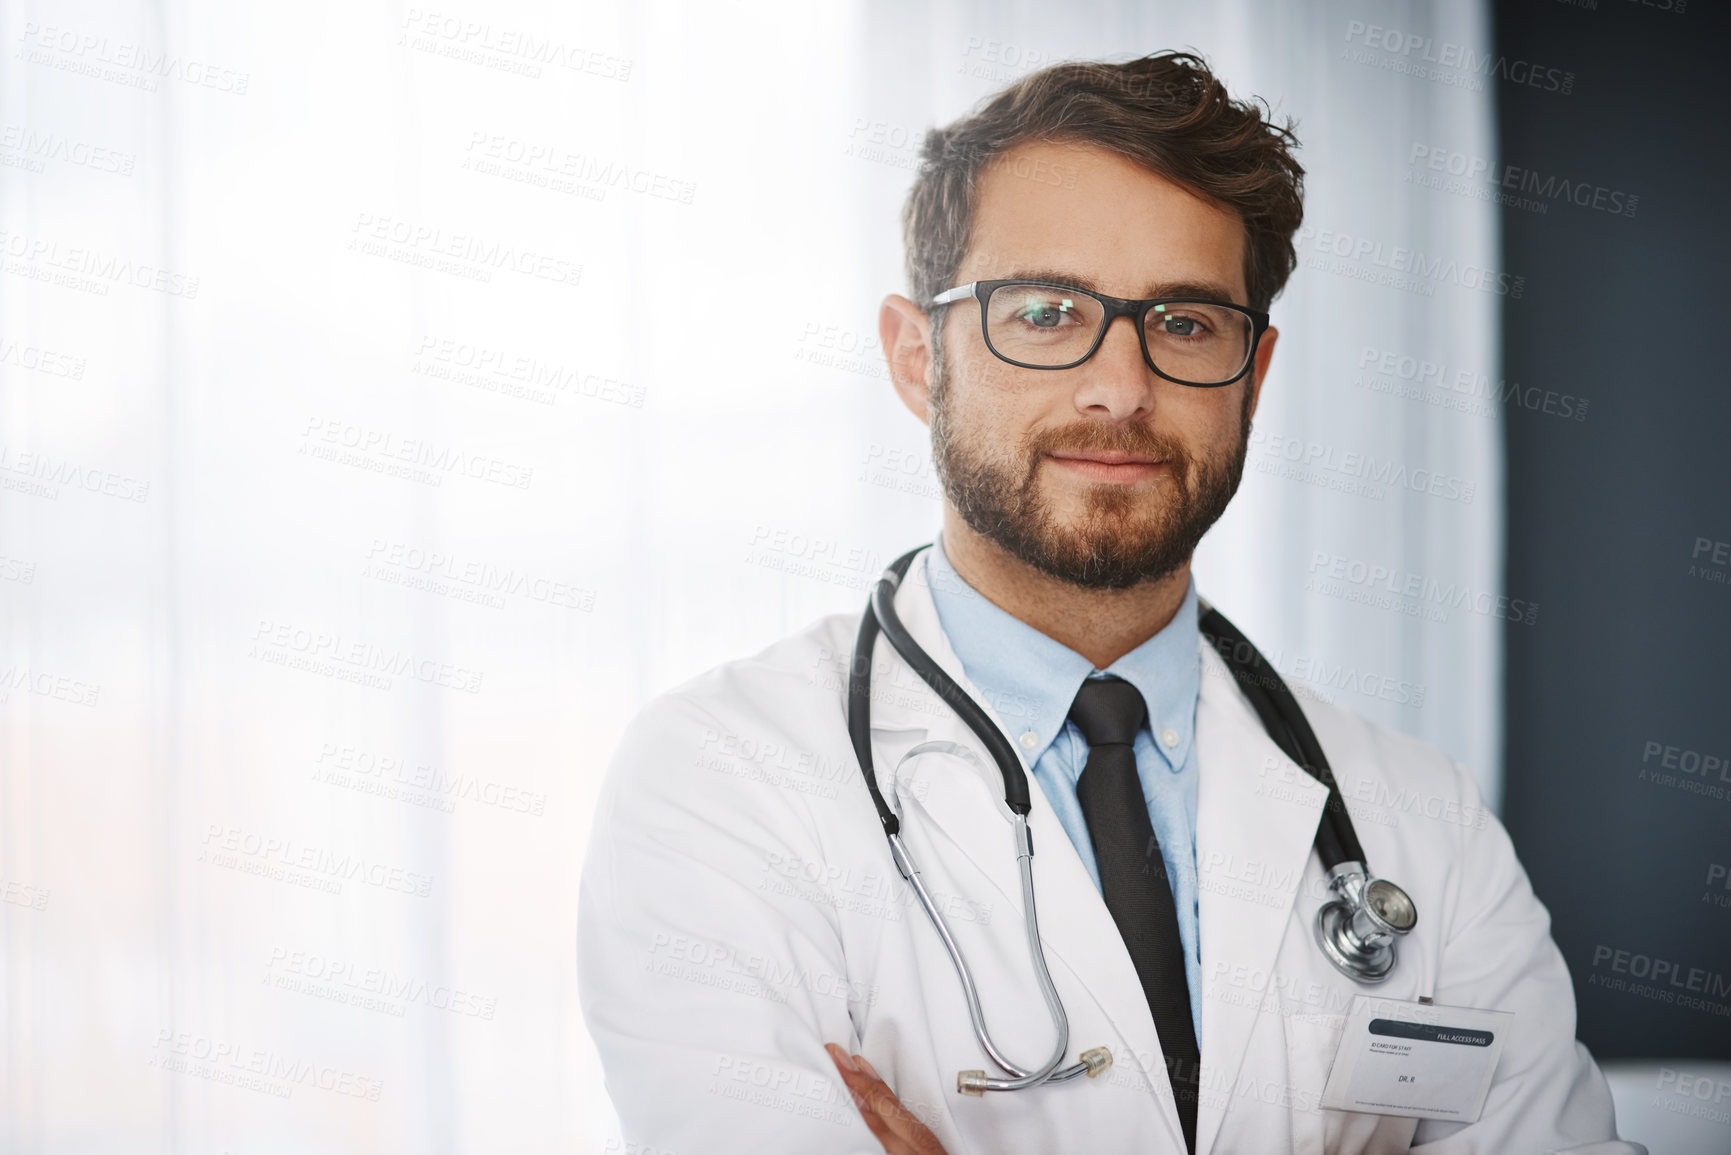 Buy stock photo Cropped portrait of a confident young male doctor standing with his arms folded inside of a hospital